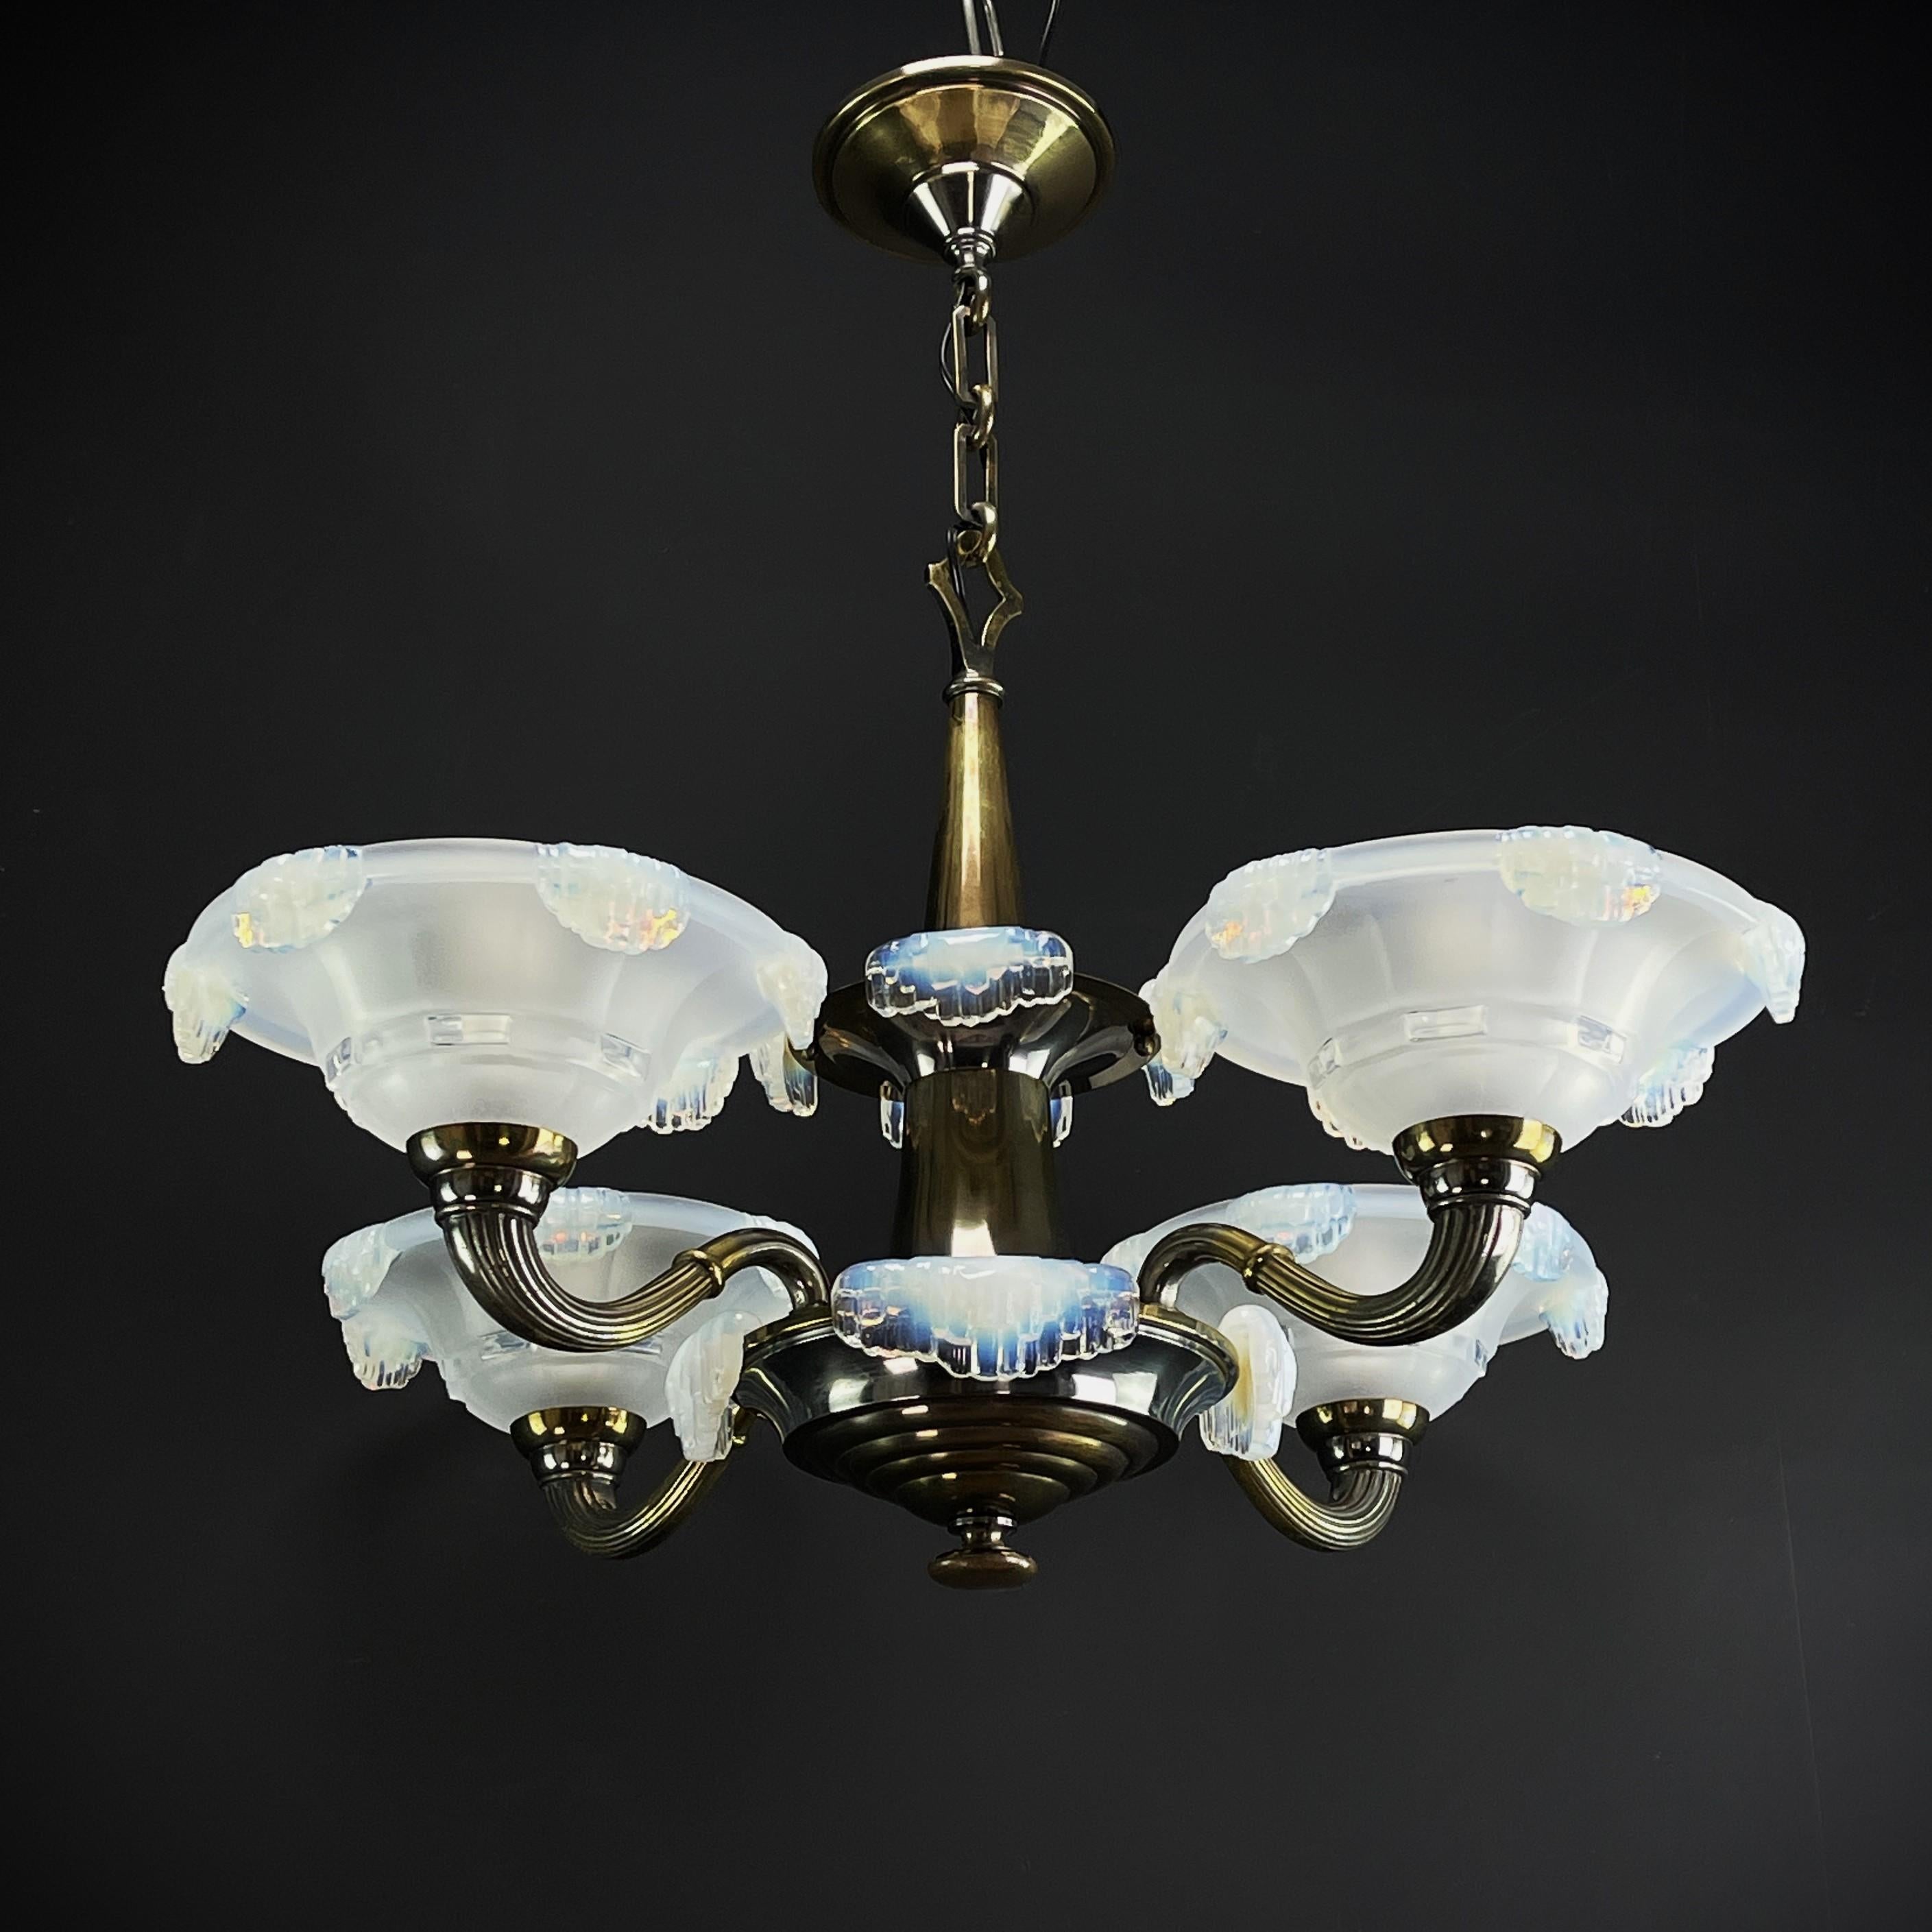 Art Deco chandelier - EZAN - 1930s

The ART DECO ceiling lamp is a remarkable example of the craftsmanship and style of the early 20th century. 

An Art Deco chandelier in the style of the 1930s could have an impressive and elegant design.
The